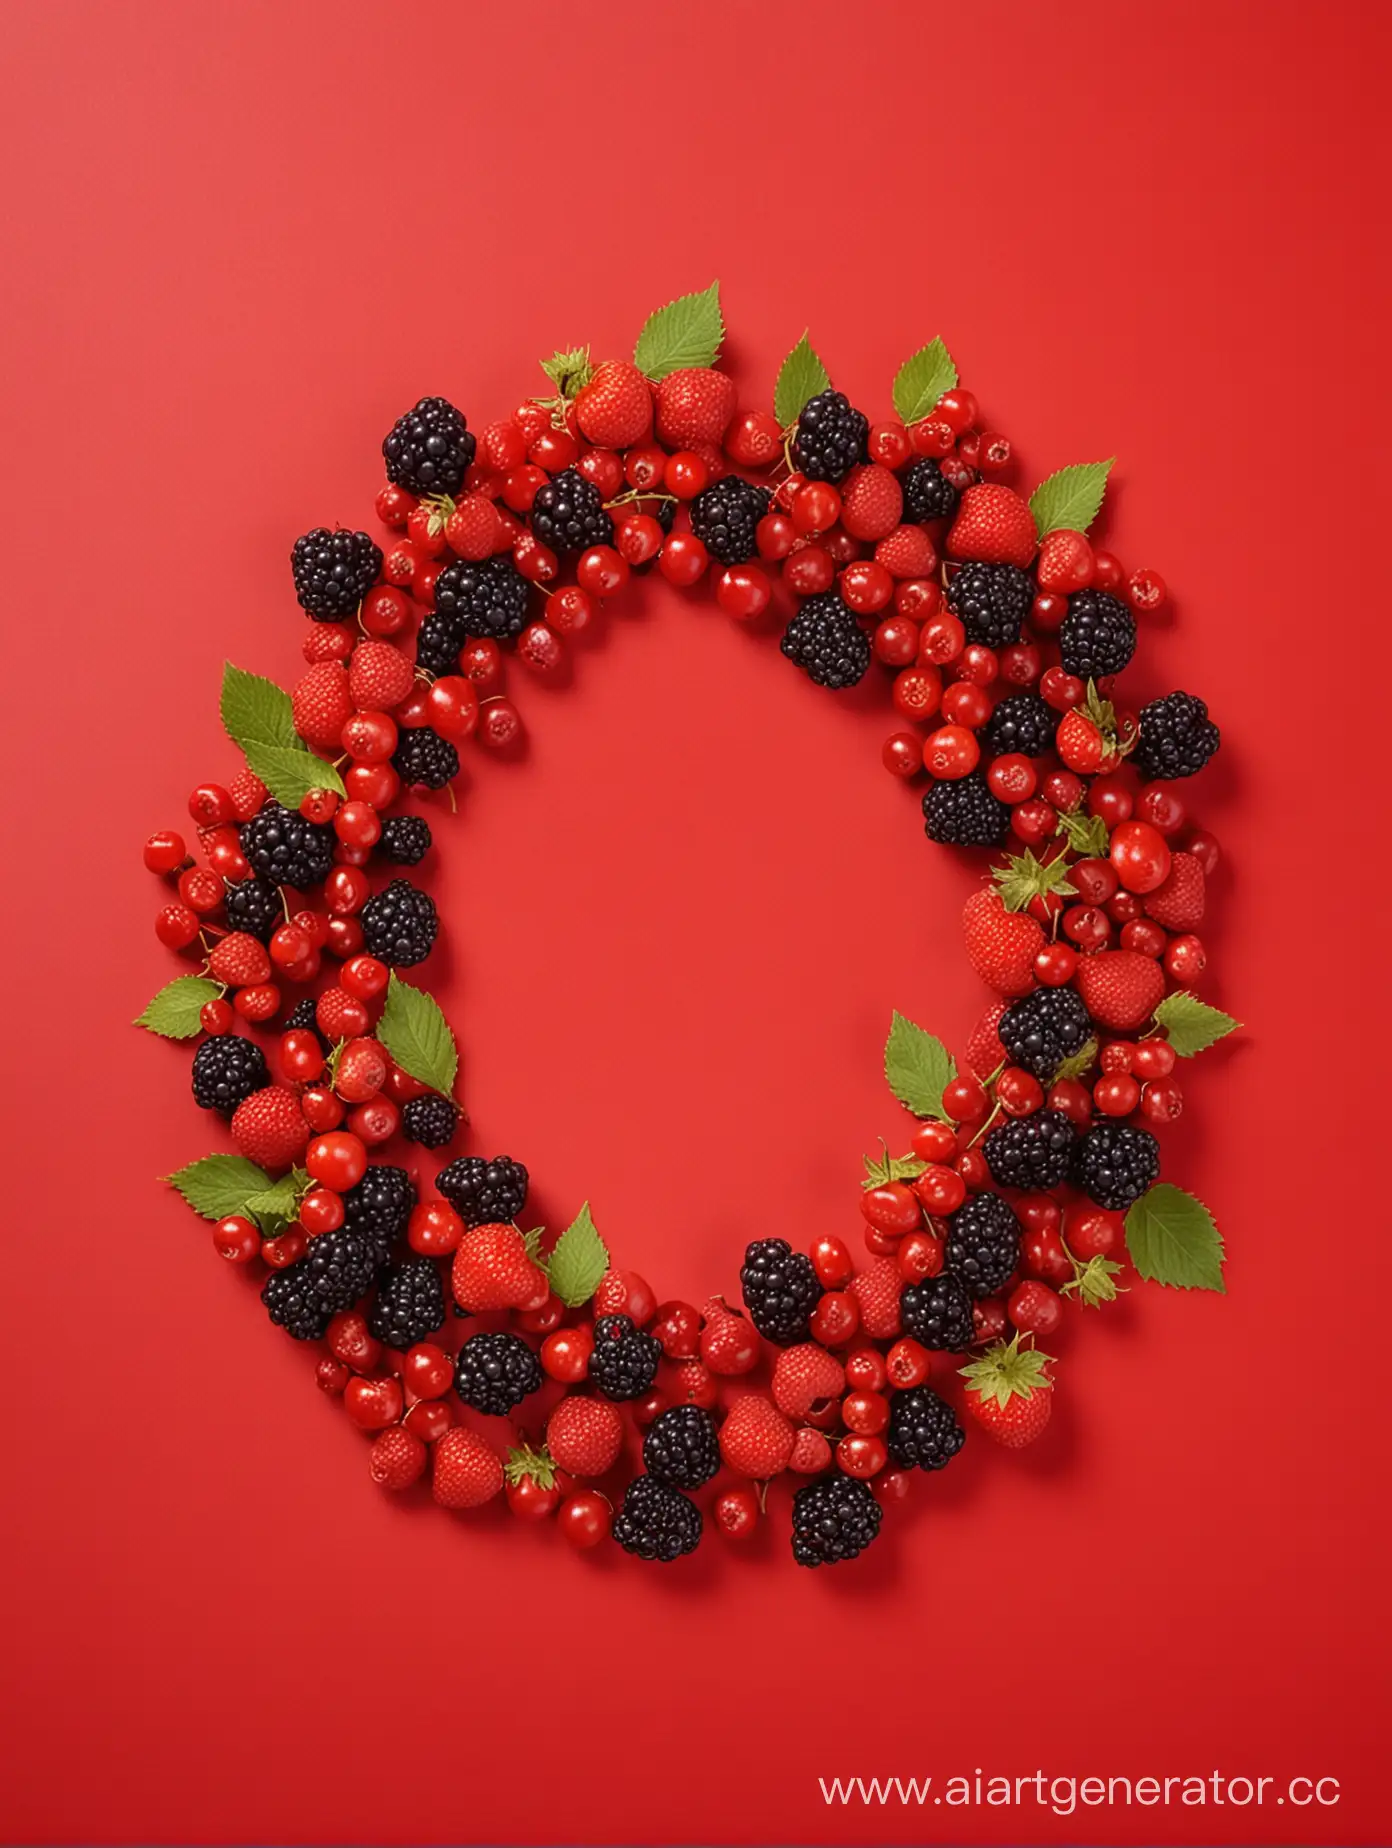 Circular-Arrangement-of-Vibrant-Berries-on-a-Scarlet-Background